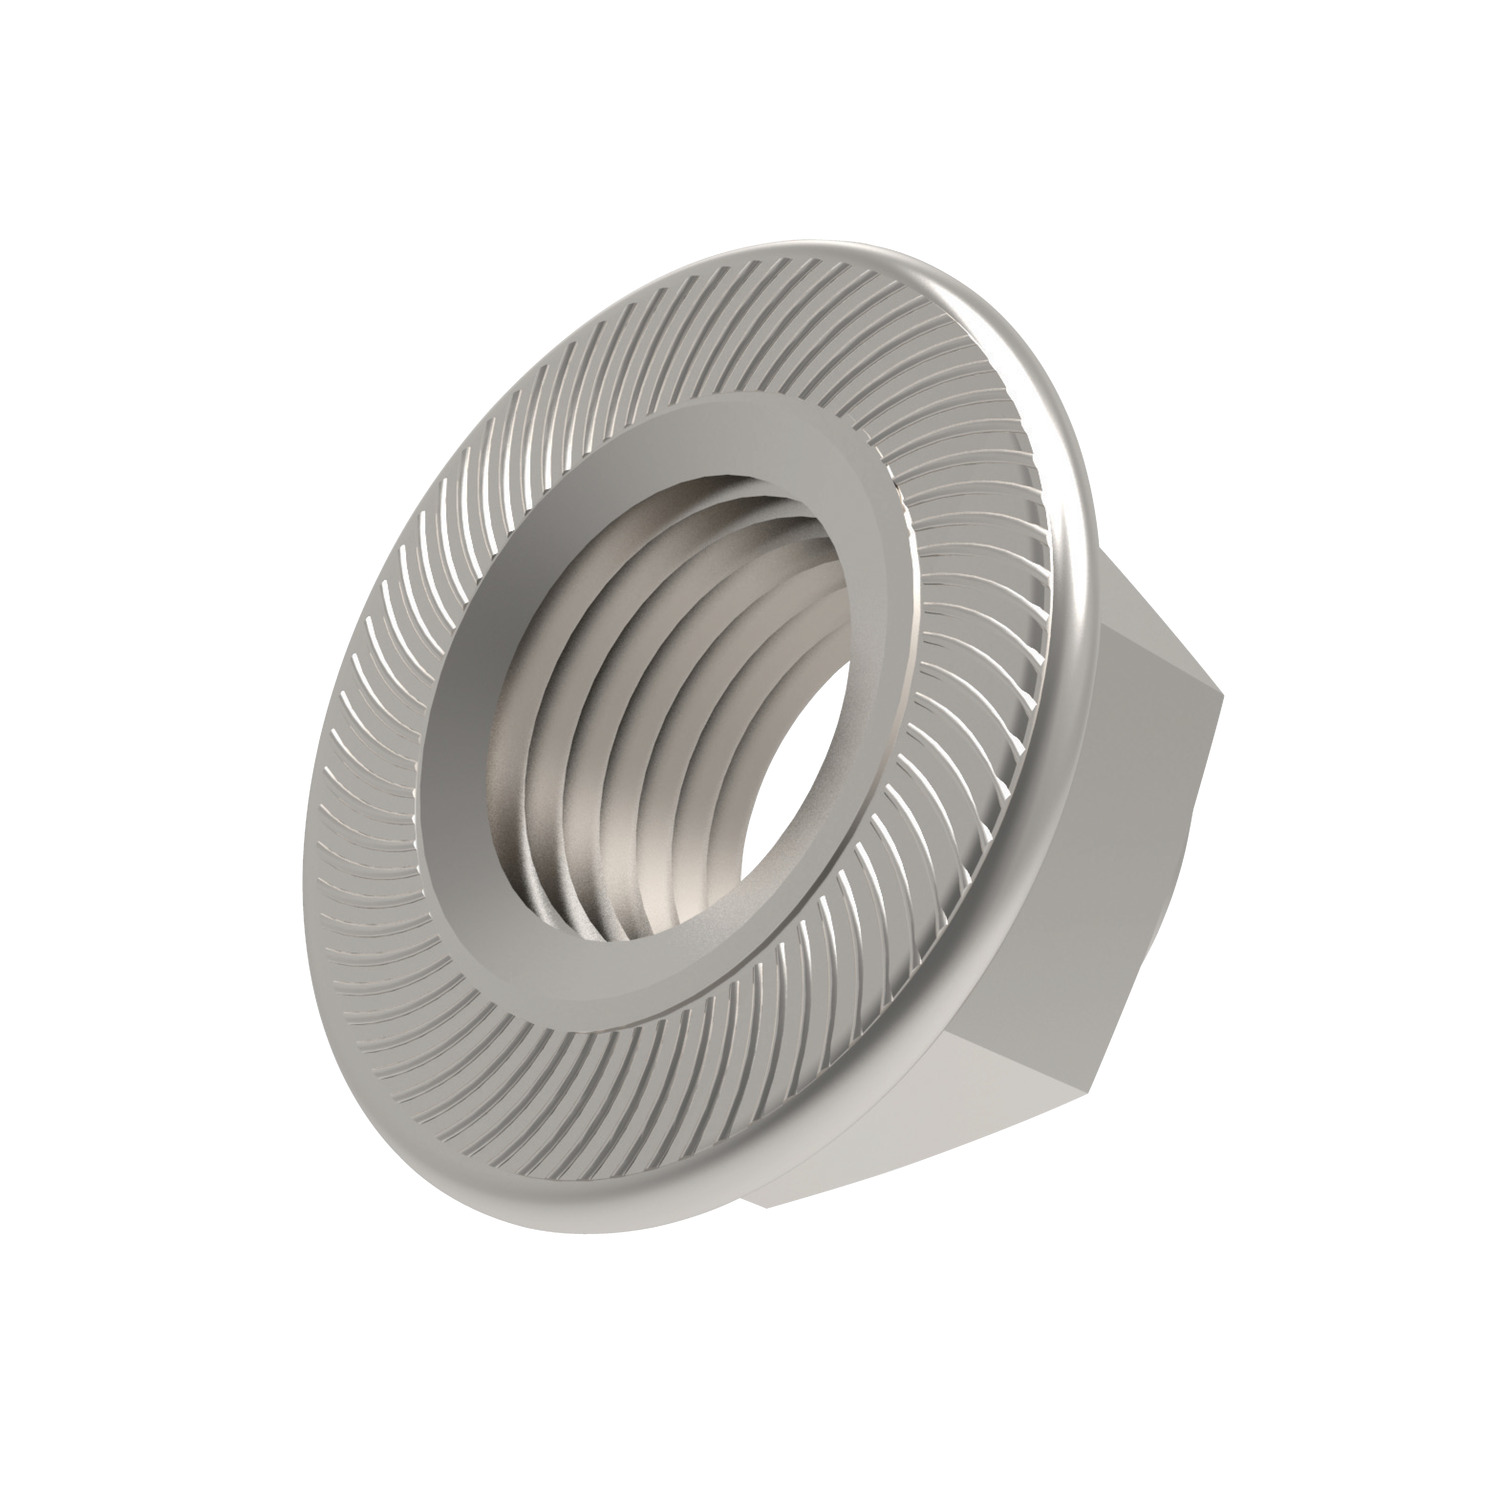 P0309.A2 Serrated Flanged Nuts